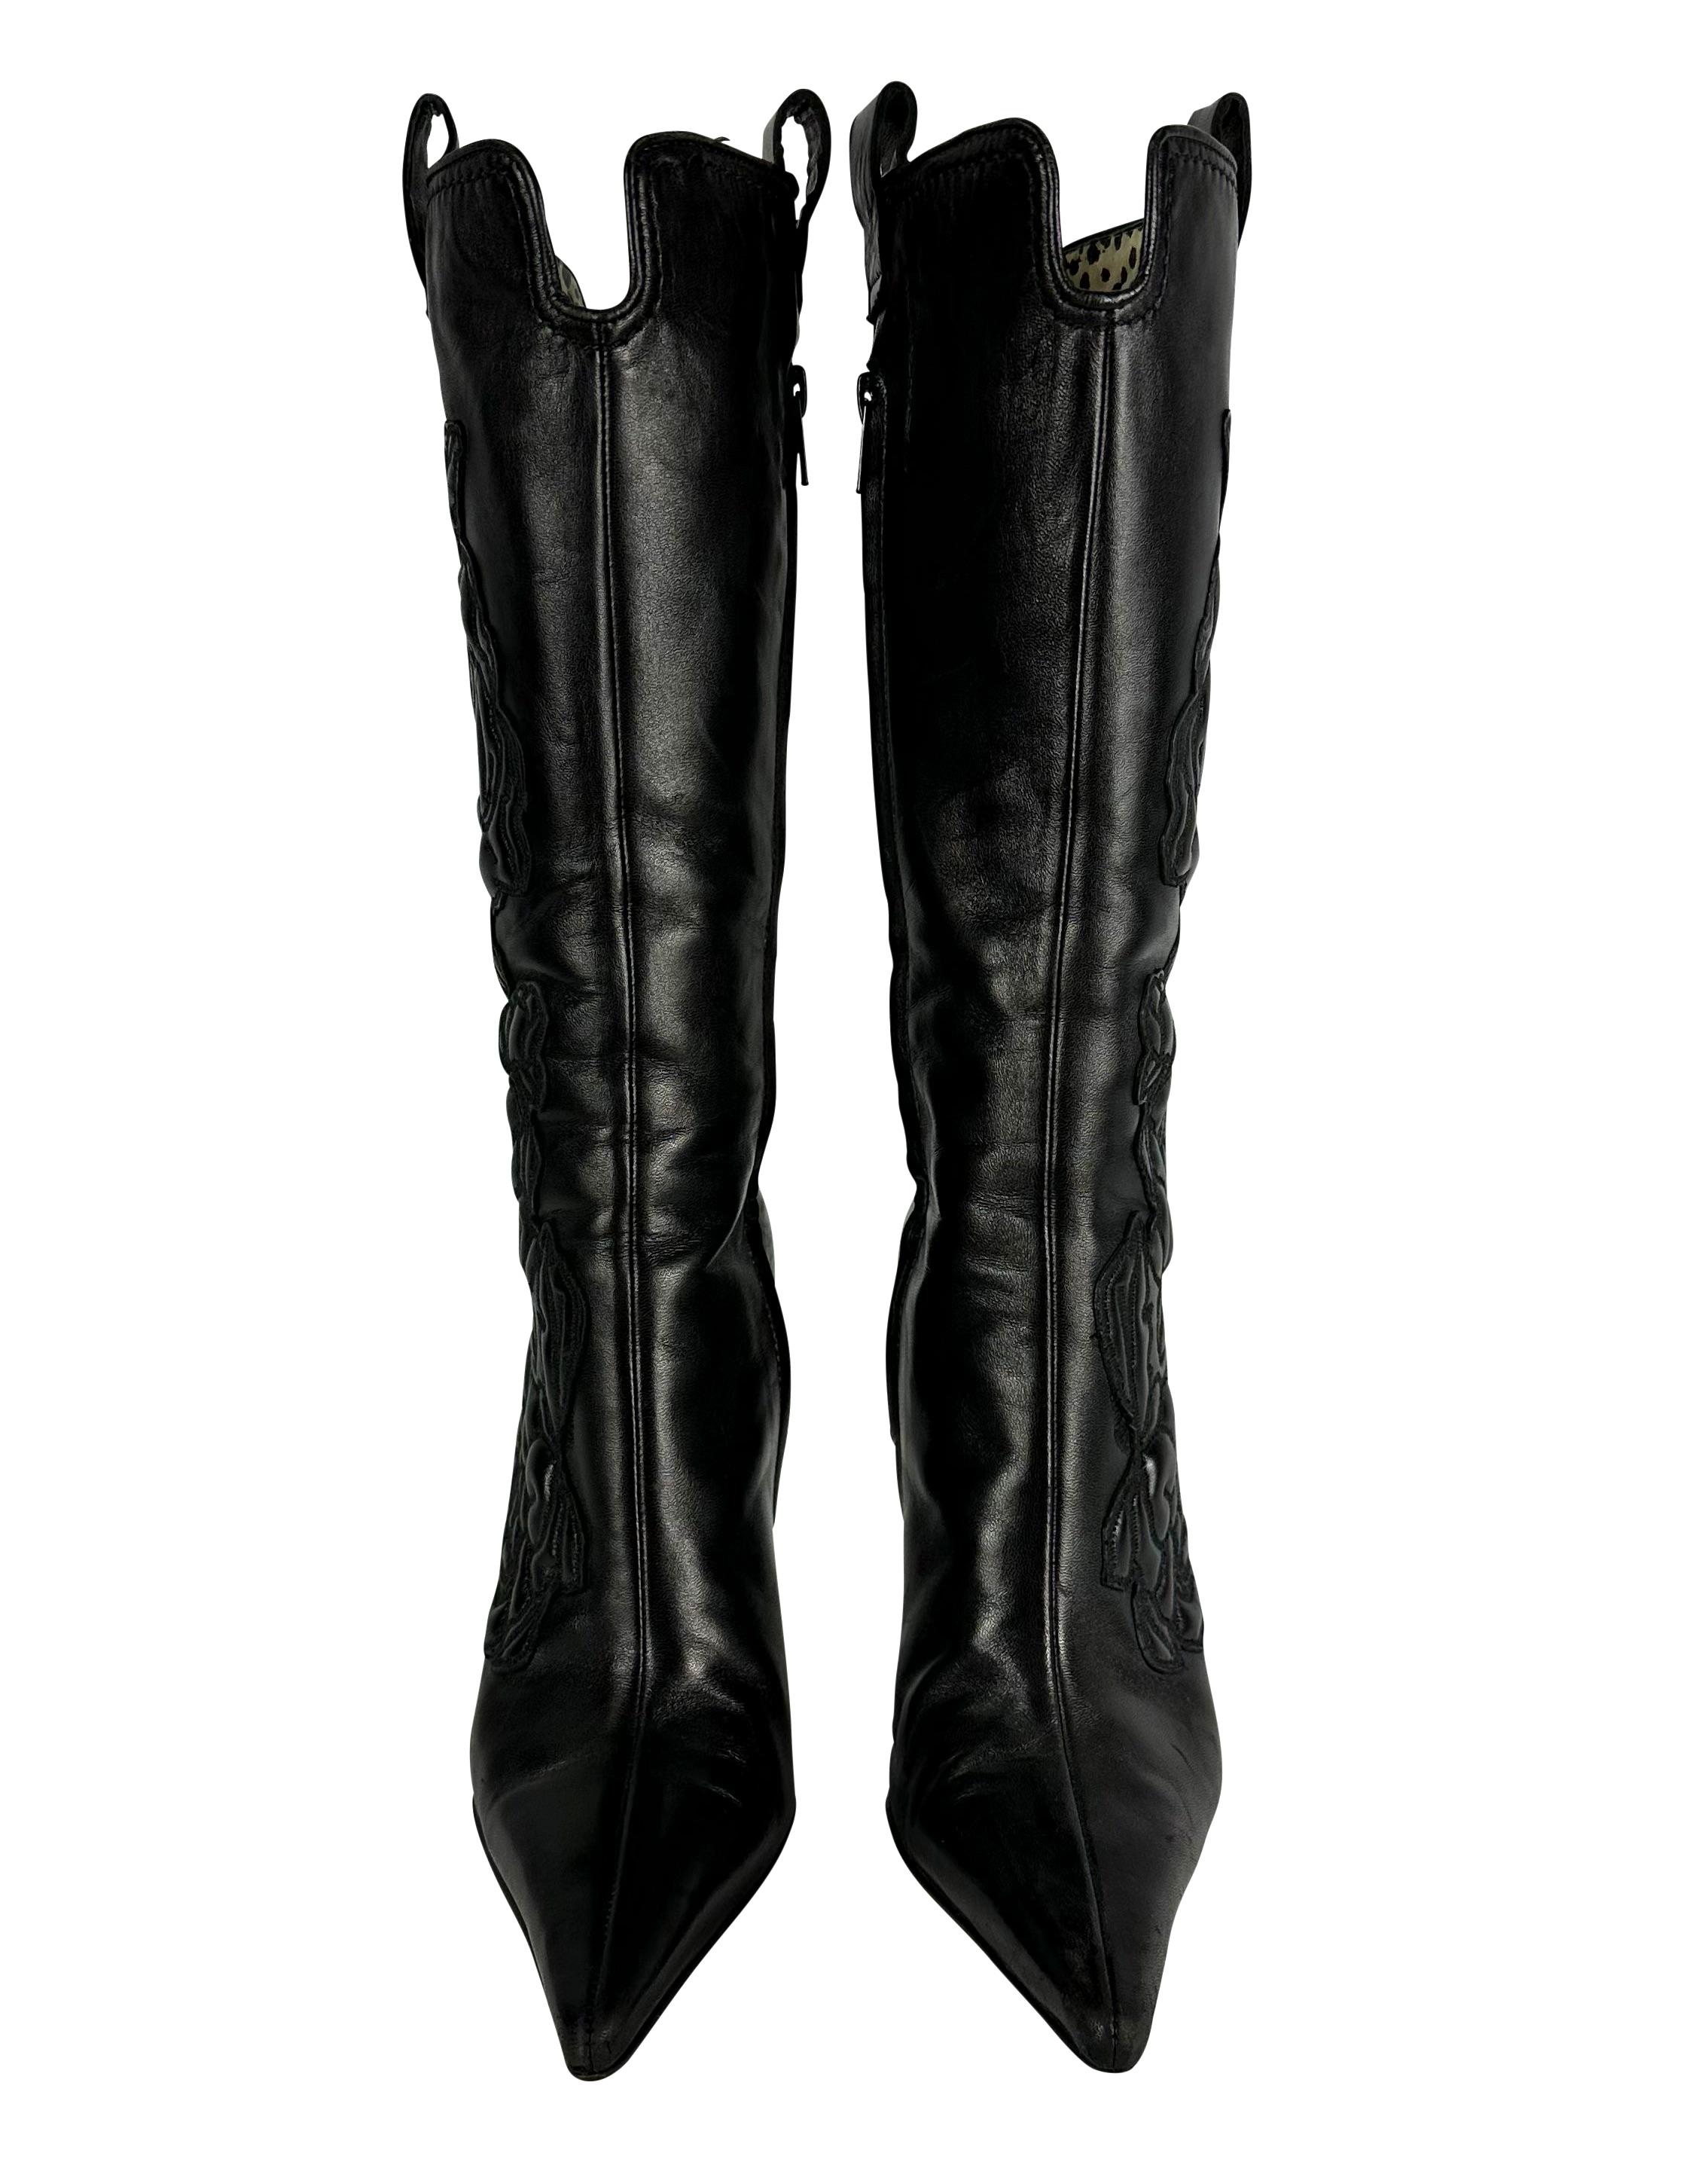 2003 Roberto Cavalli Rose Embroidered Black Leather Heeled Boots 37 IT  2